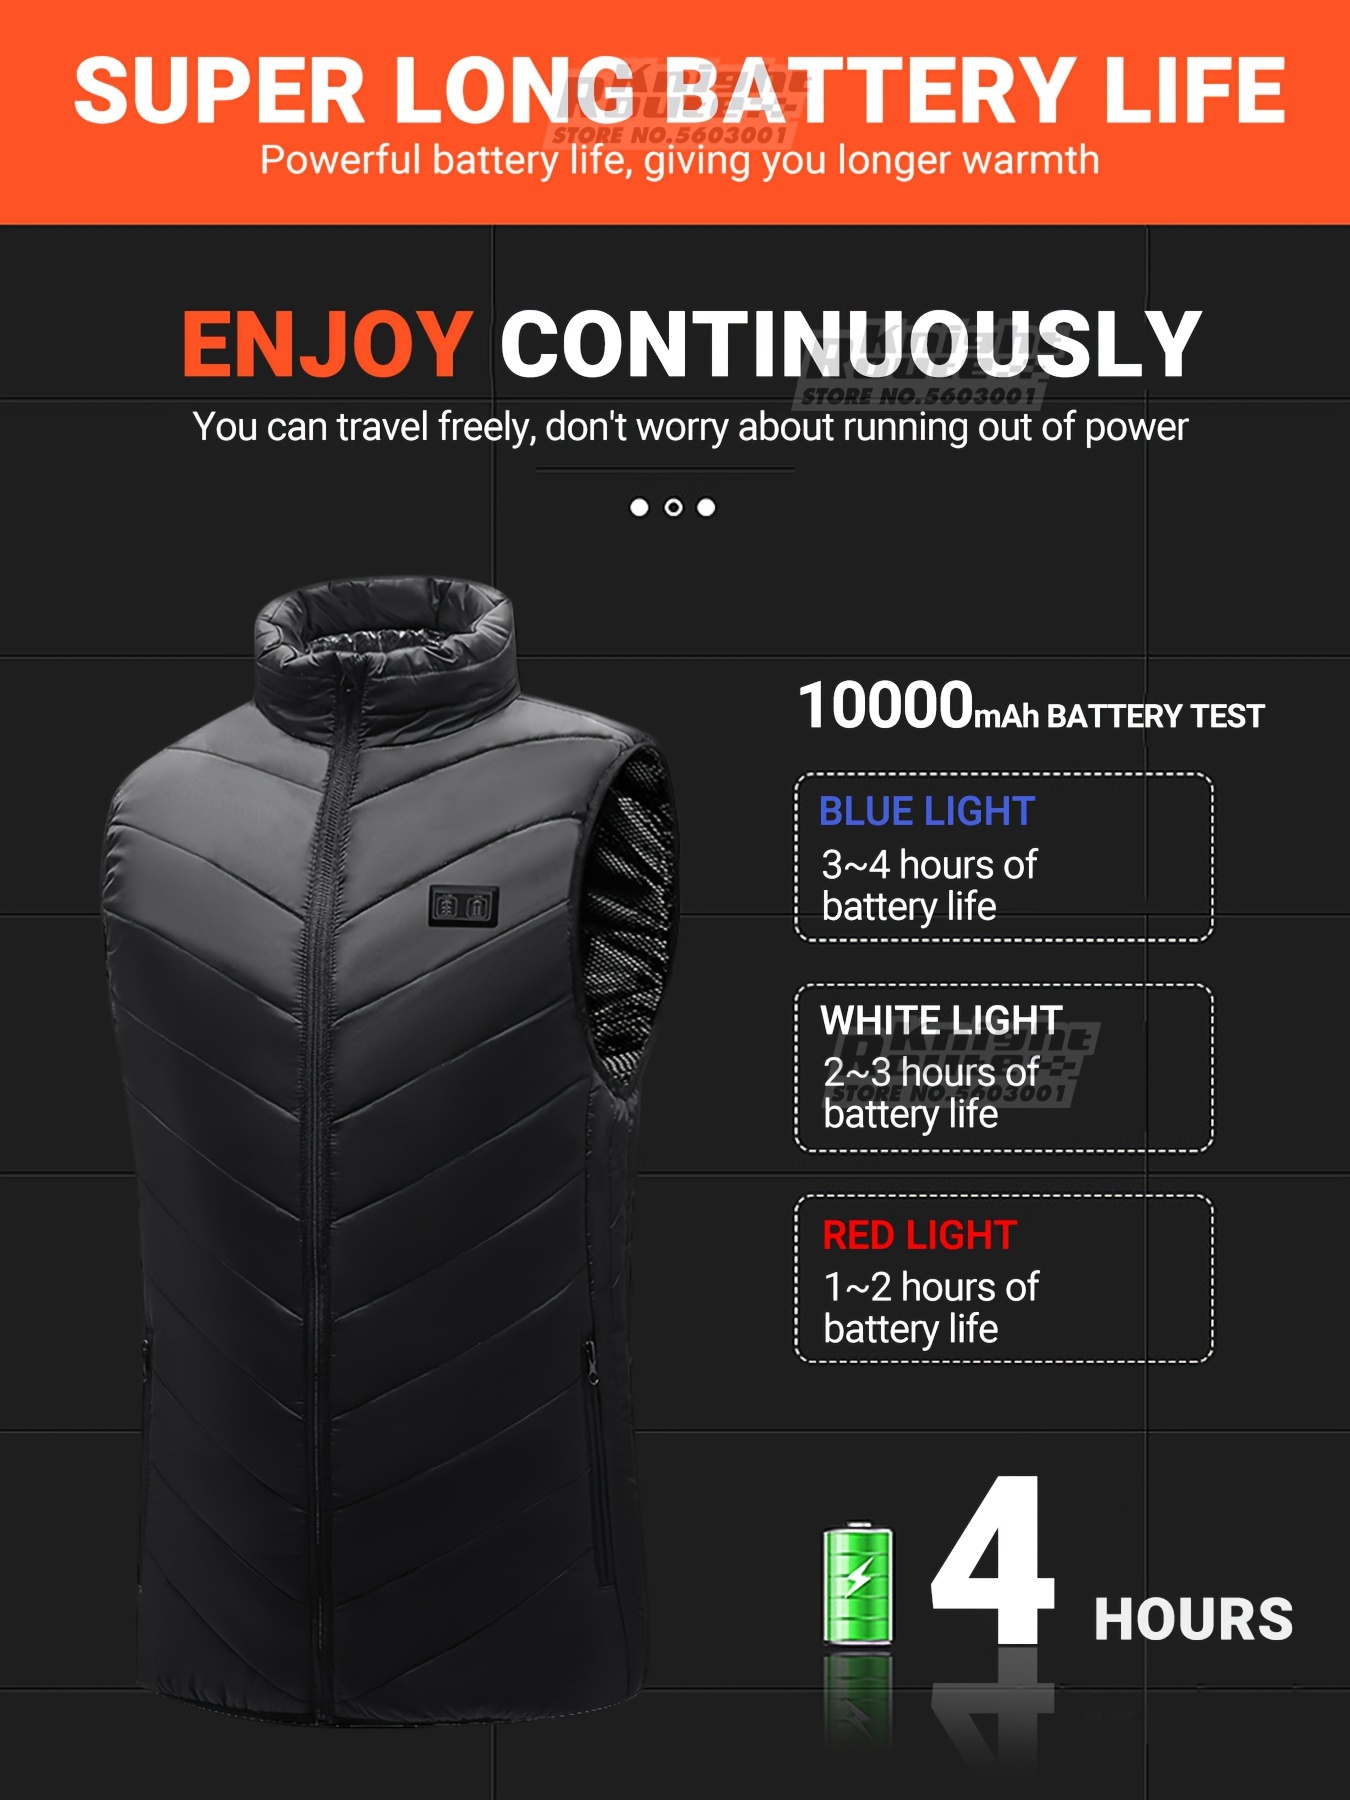 10000mAh Heating Vest Battery Pack for Heated Jacket,Heat Glove 2